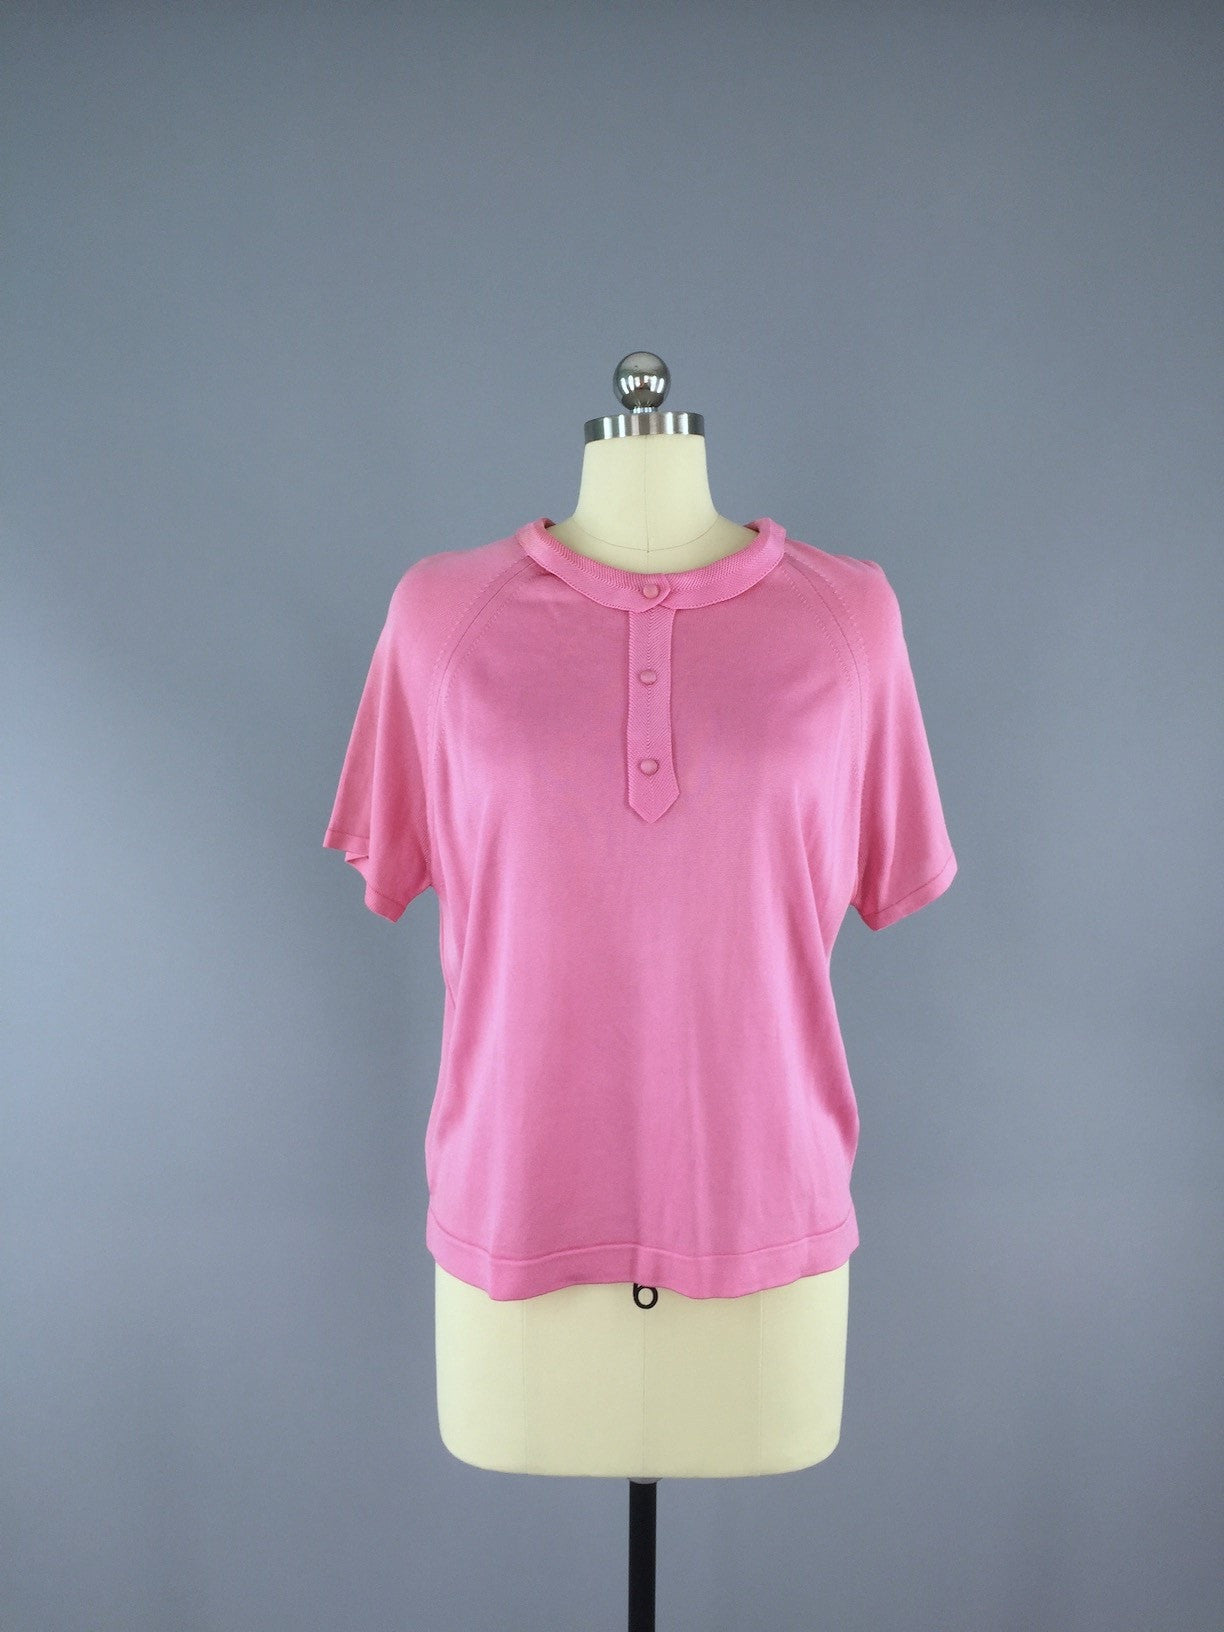 Vintage 1960s Carnation Pink Sweater Top – ThisBlueBird